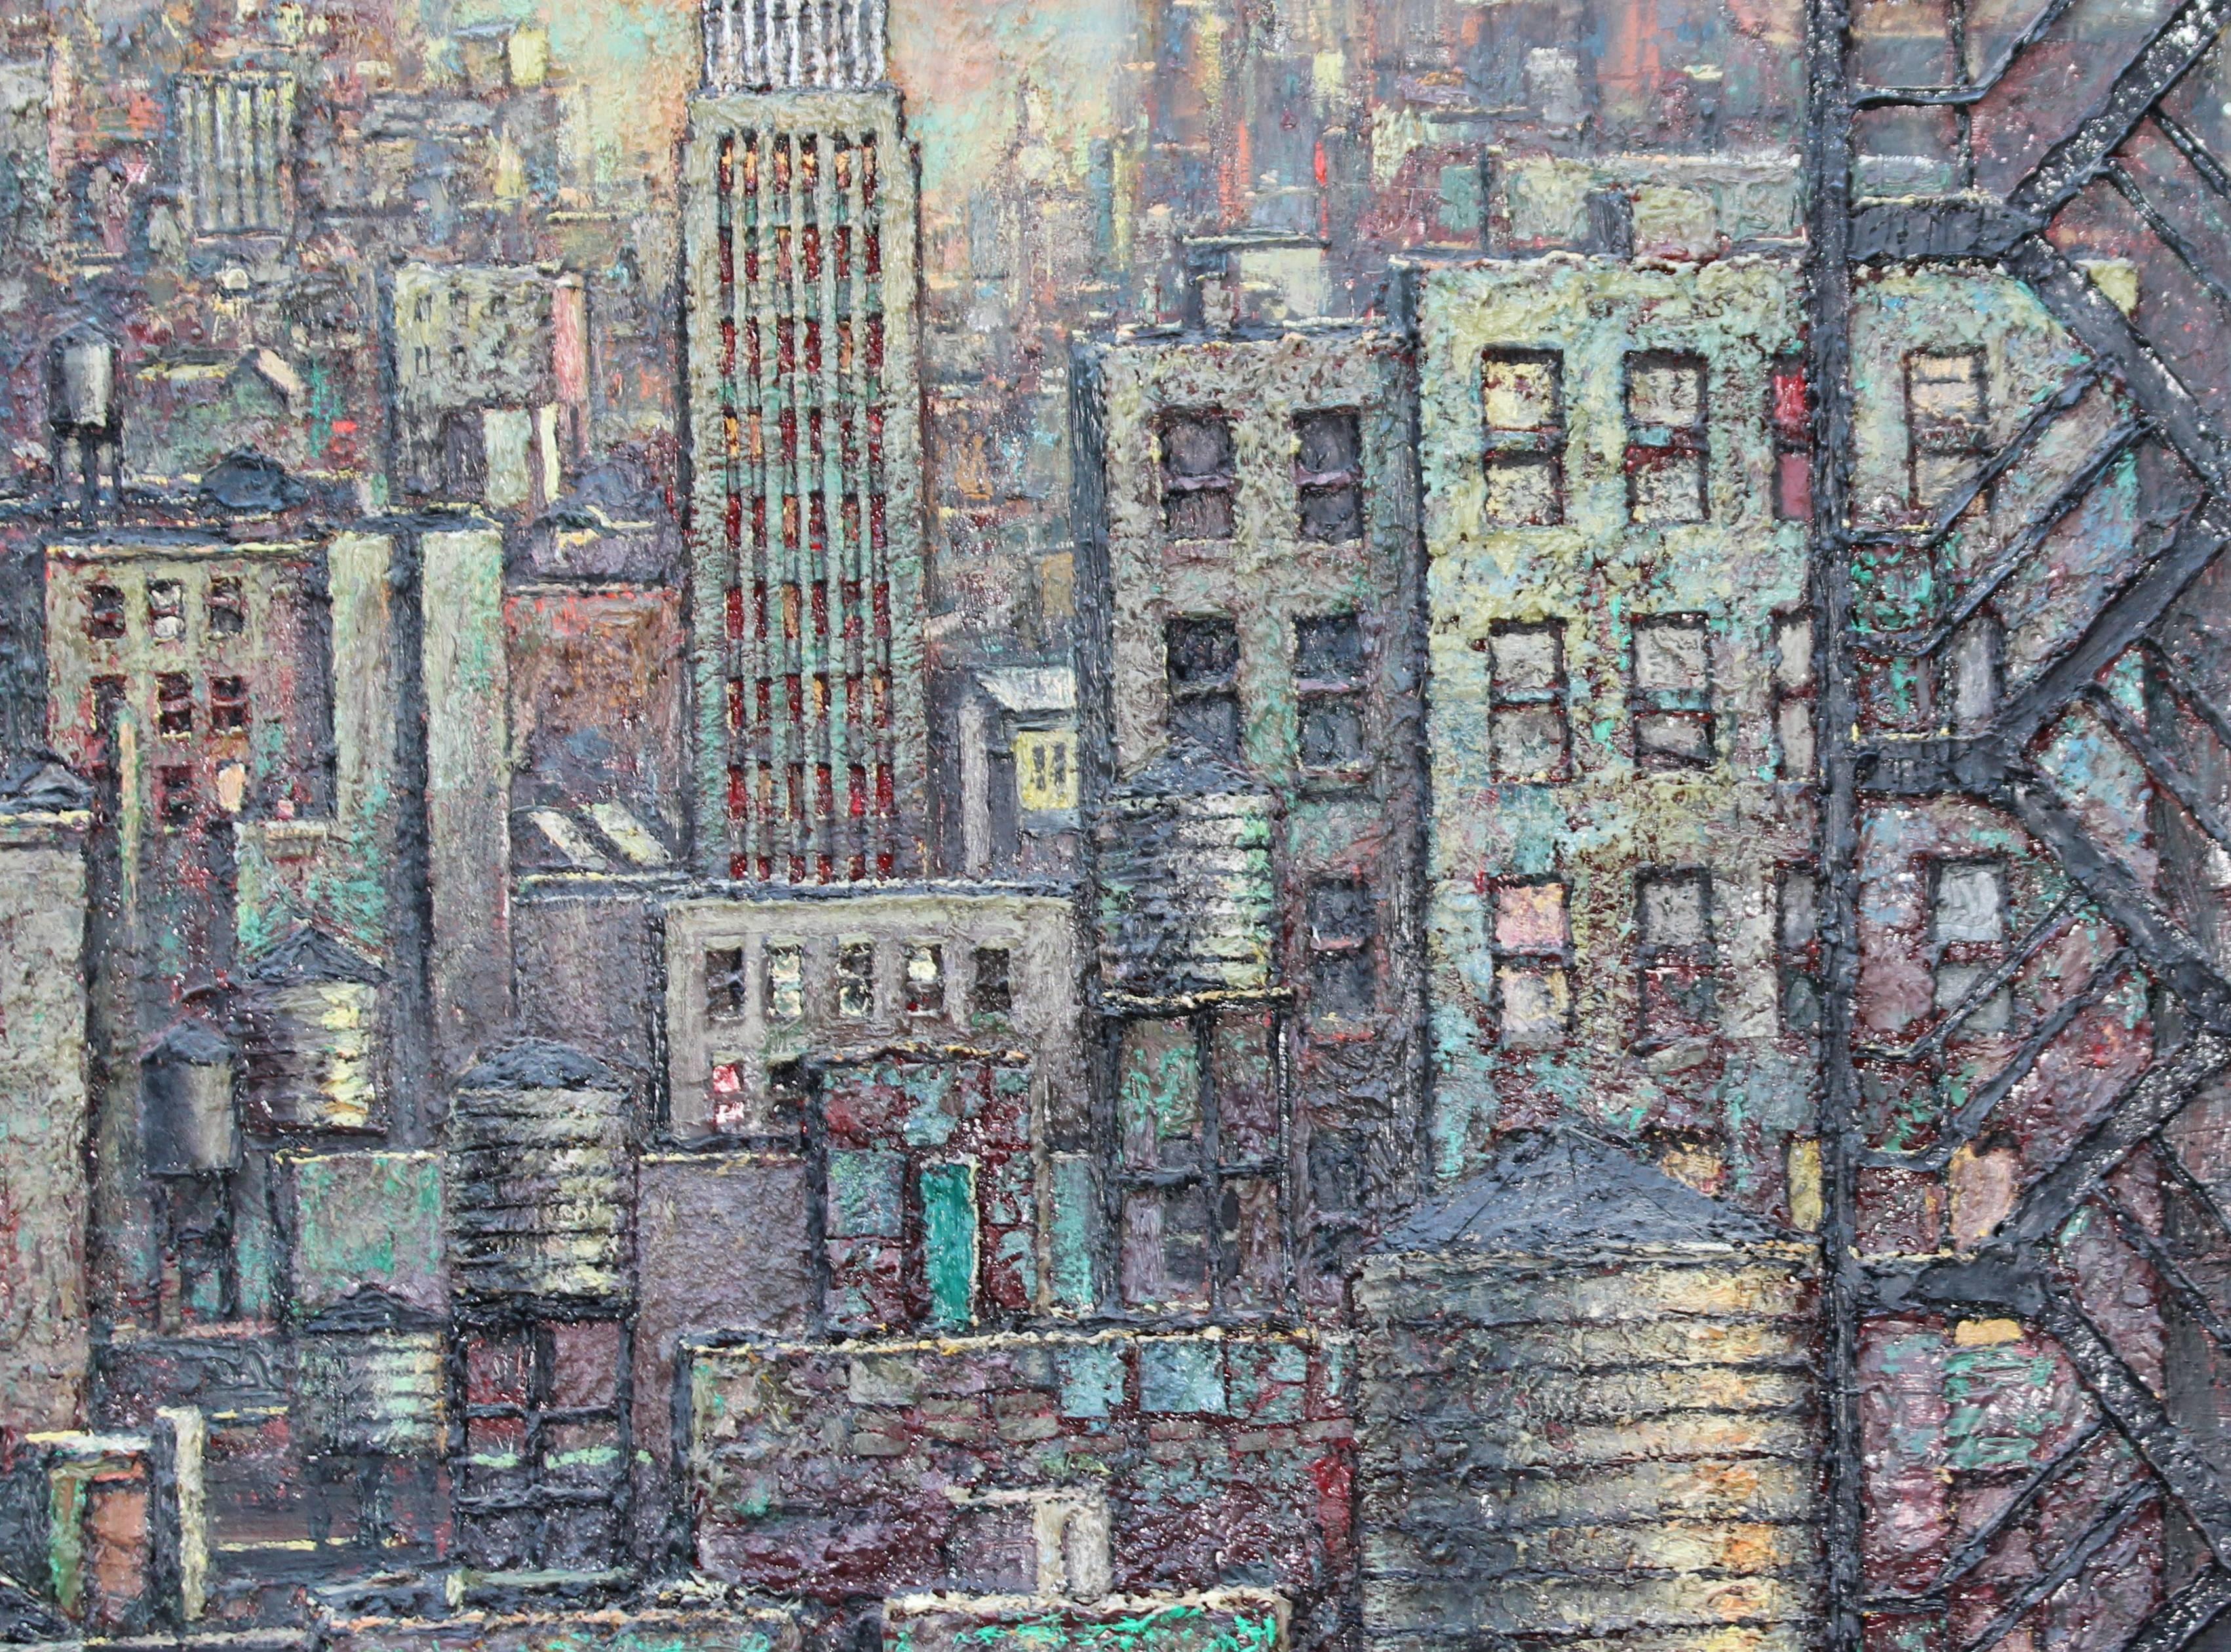 Painted Daniel Hauben Painting NYC Skyline Empire State Bldg. Trade Center For Sale